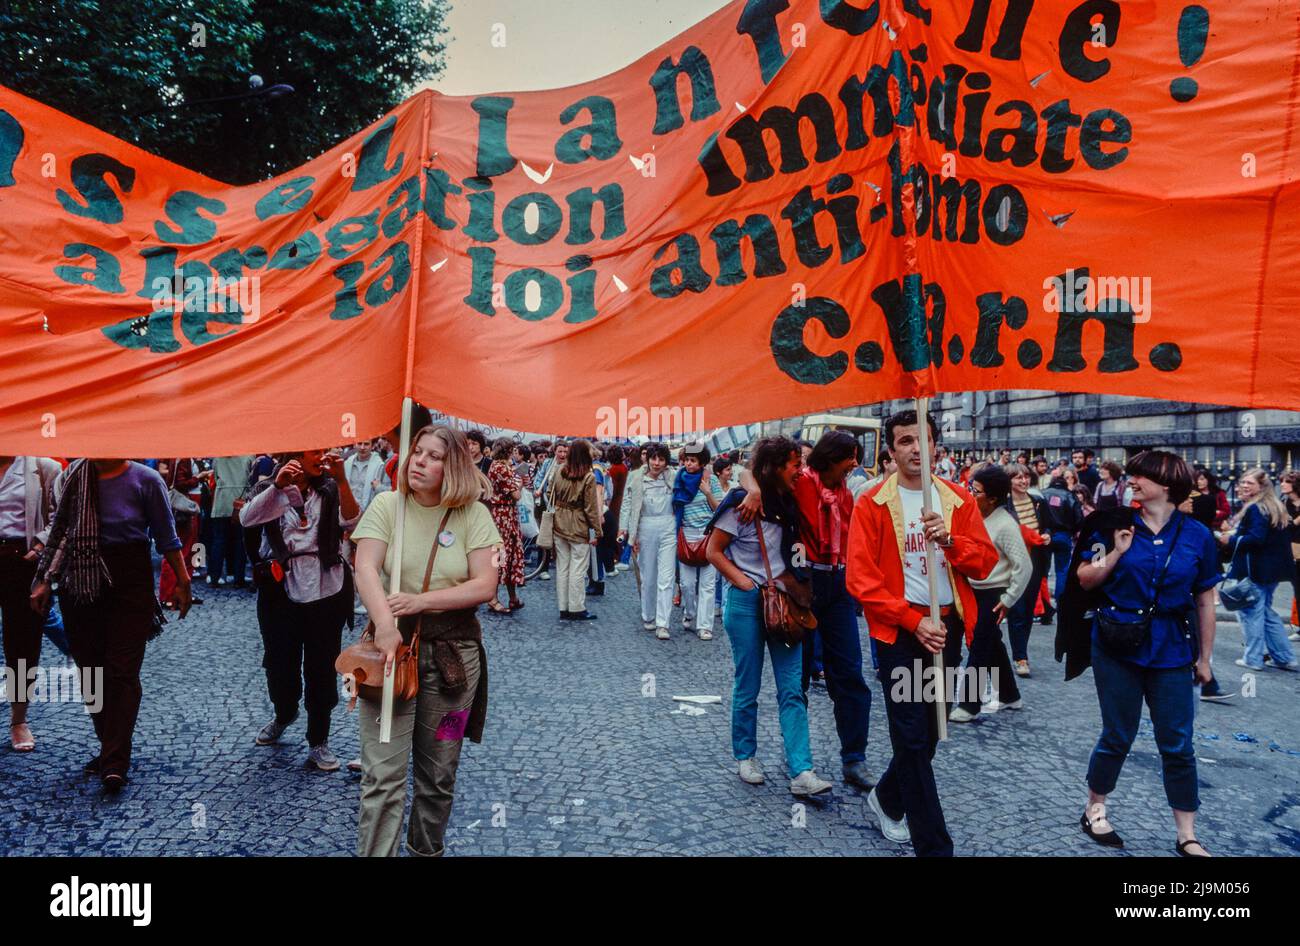 Paris, France, Large Crowd People Marching in LGBT Fierté, Gay Pride March, 1982, Protest Banner CURH, Homosexual Group, 1980s Archives, gay protest vintage Stock Photo